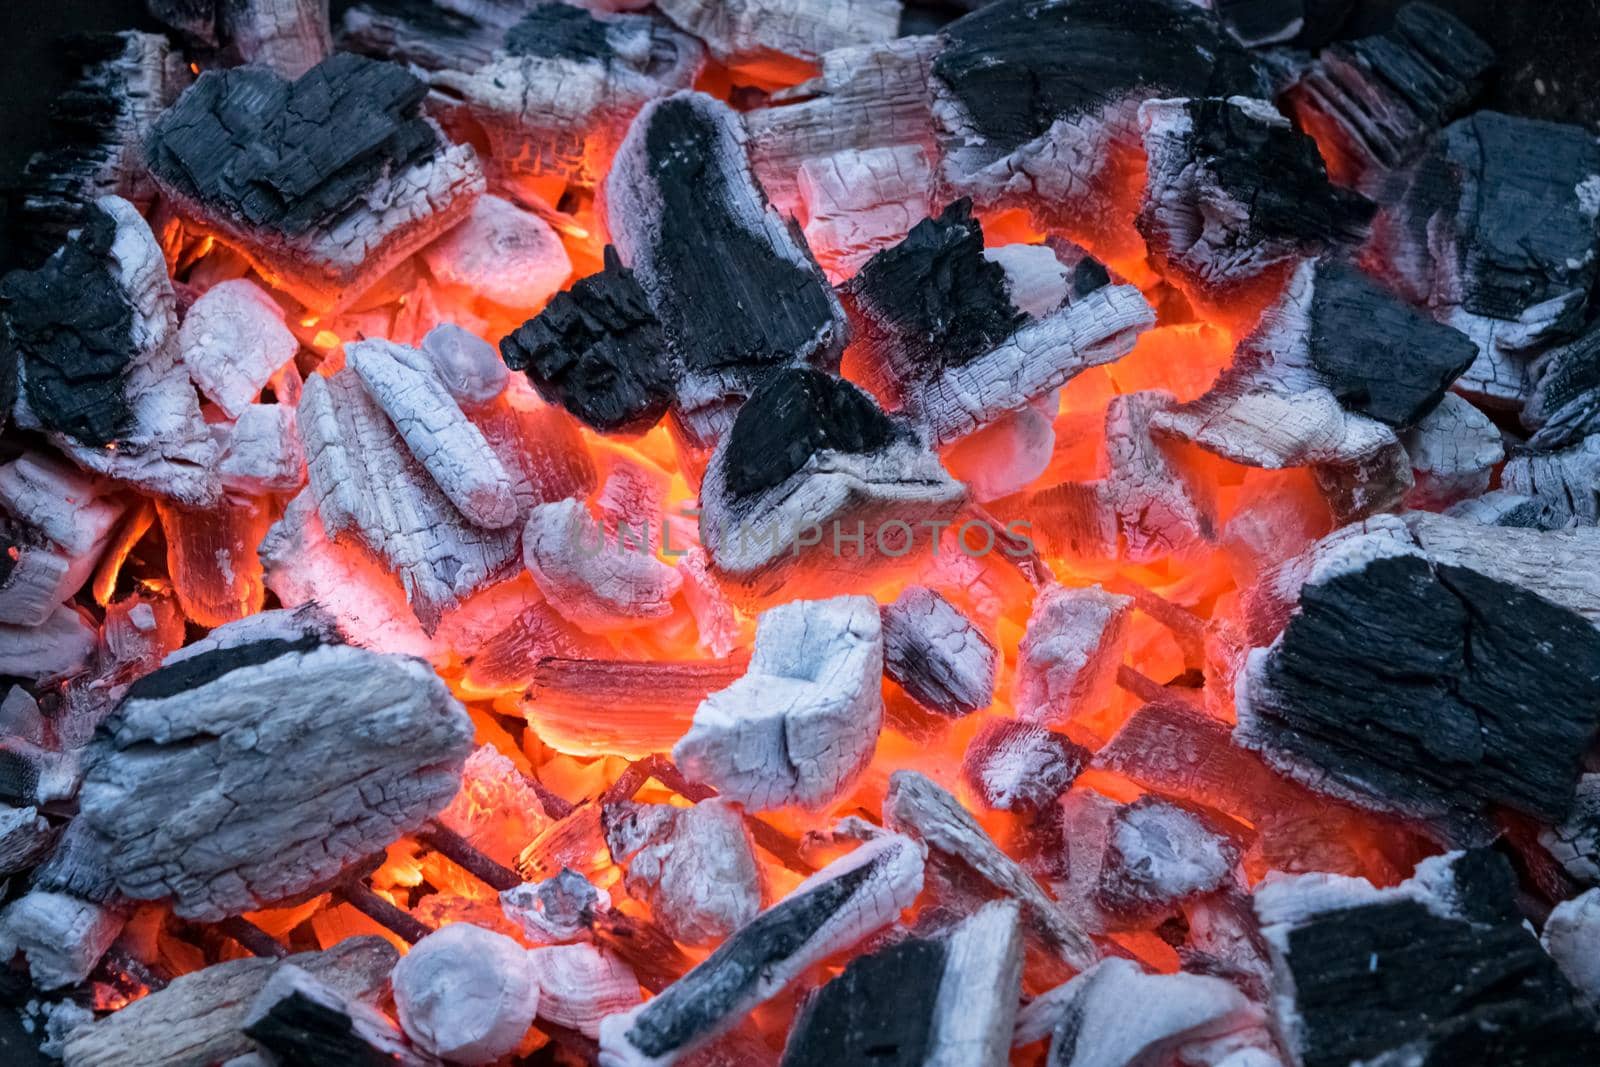 Closeup of glowing and flaming pieces of coal. Ready to start a barbecue. by silentstock639